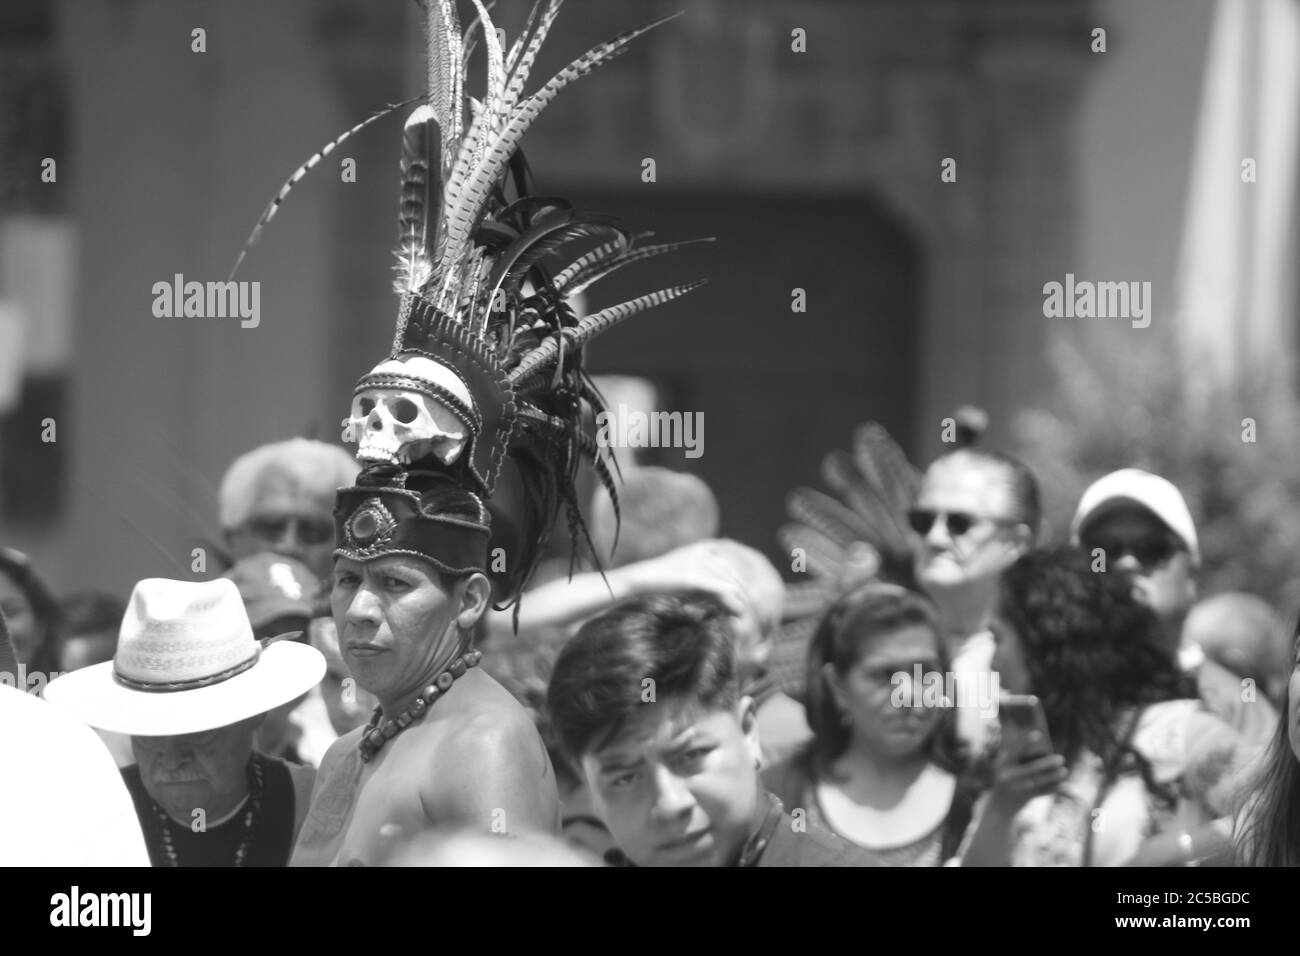 MEXICO CITY, MEXICO - September / 22 / 2018 indigenous man with aztec clothing and plume with human skull Stock Photo